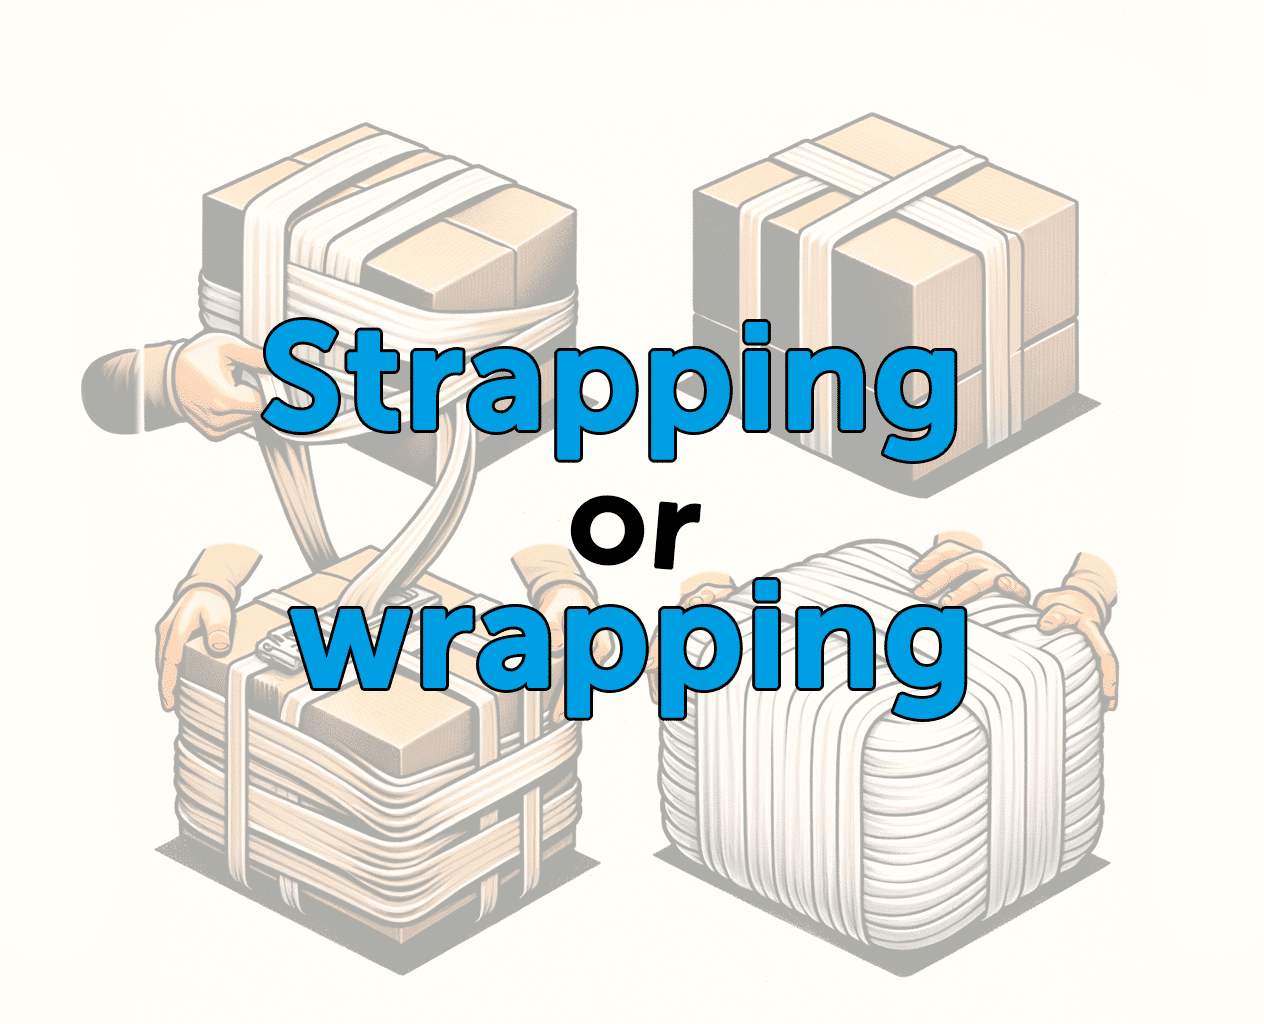 Strapping vs wrapping